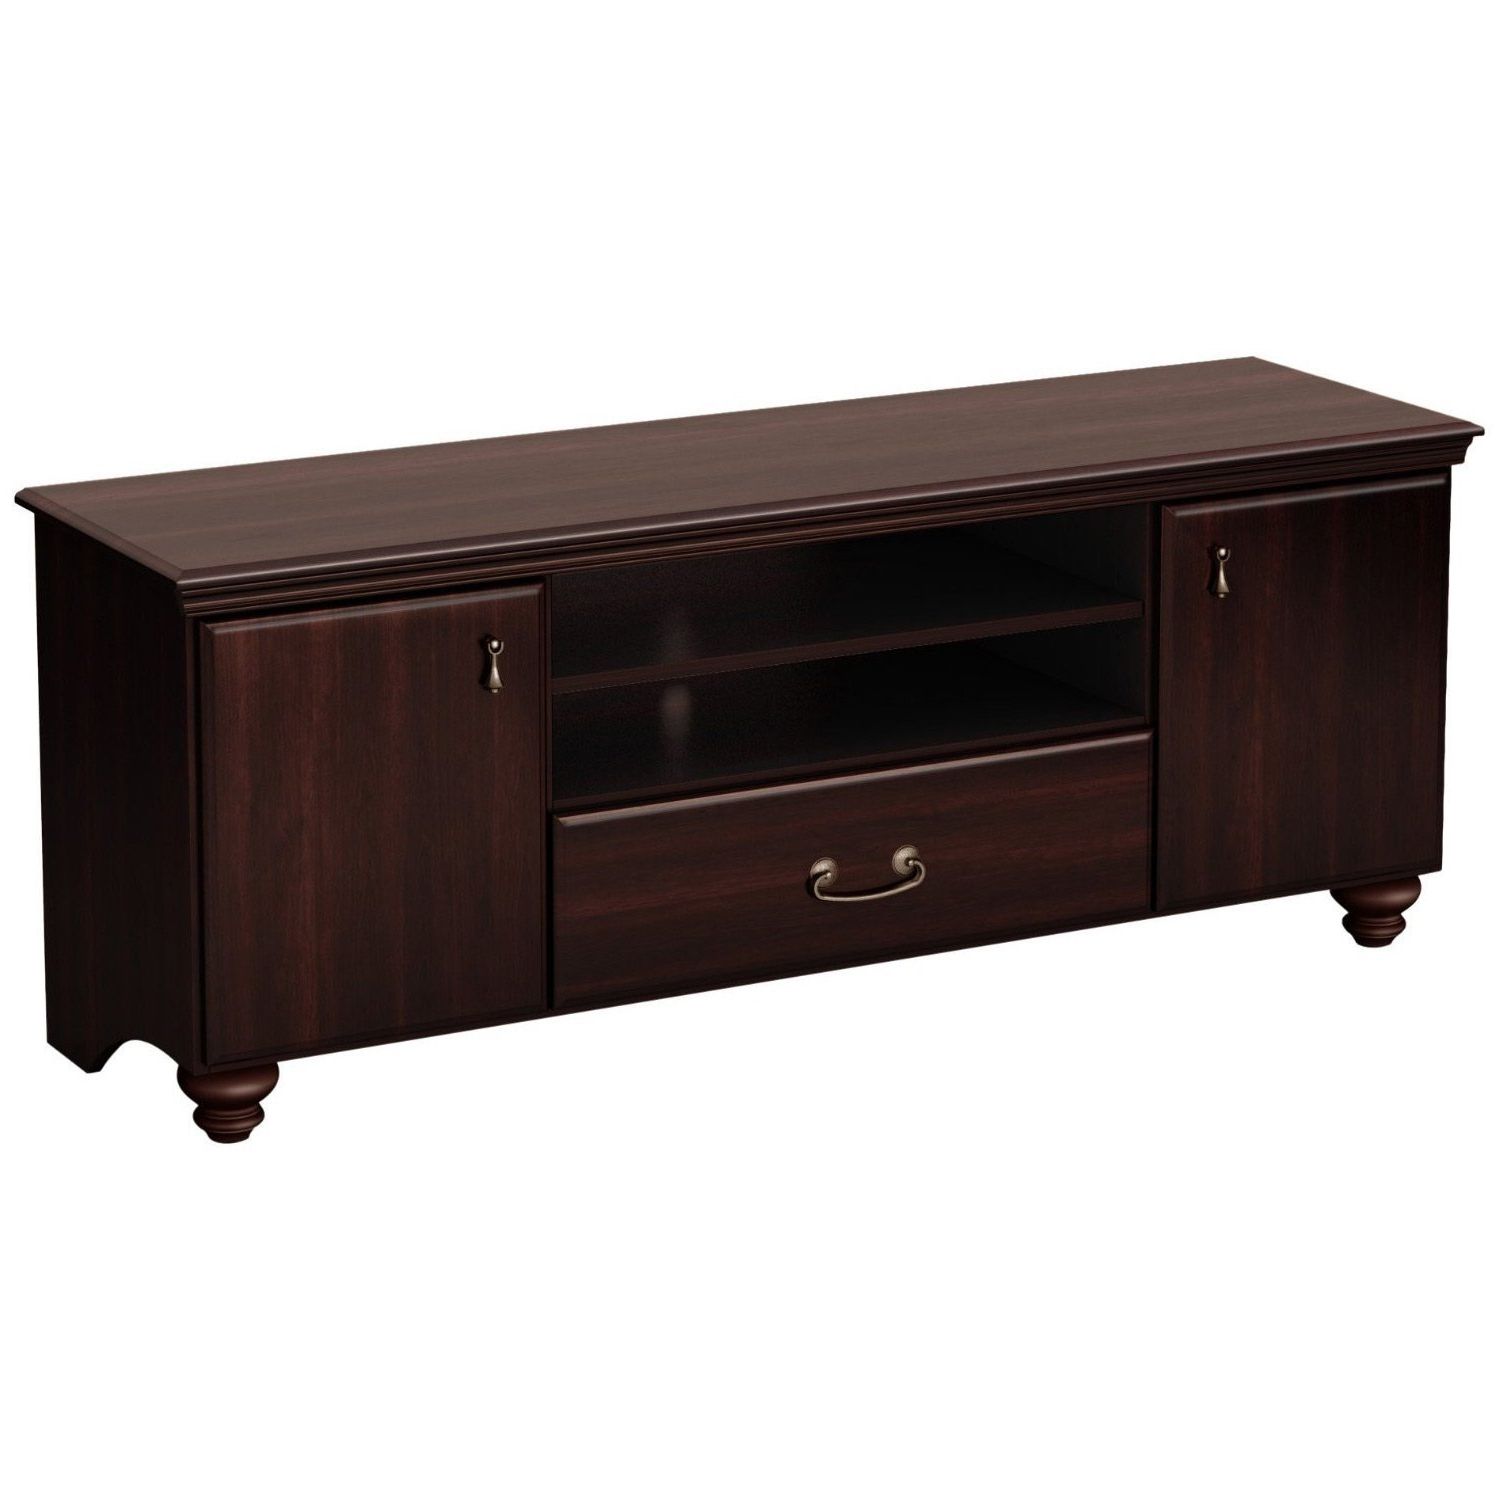 Mahogany Tv Stands Inside Well Known Traditional Style Tv Stand In Dark Mahogany Finish – Fits Tvs Up To (View 13 of 20)